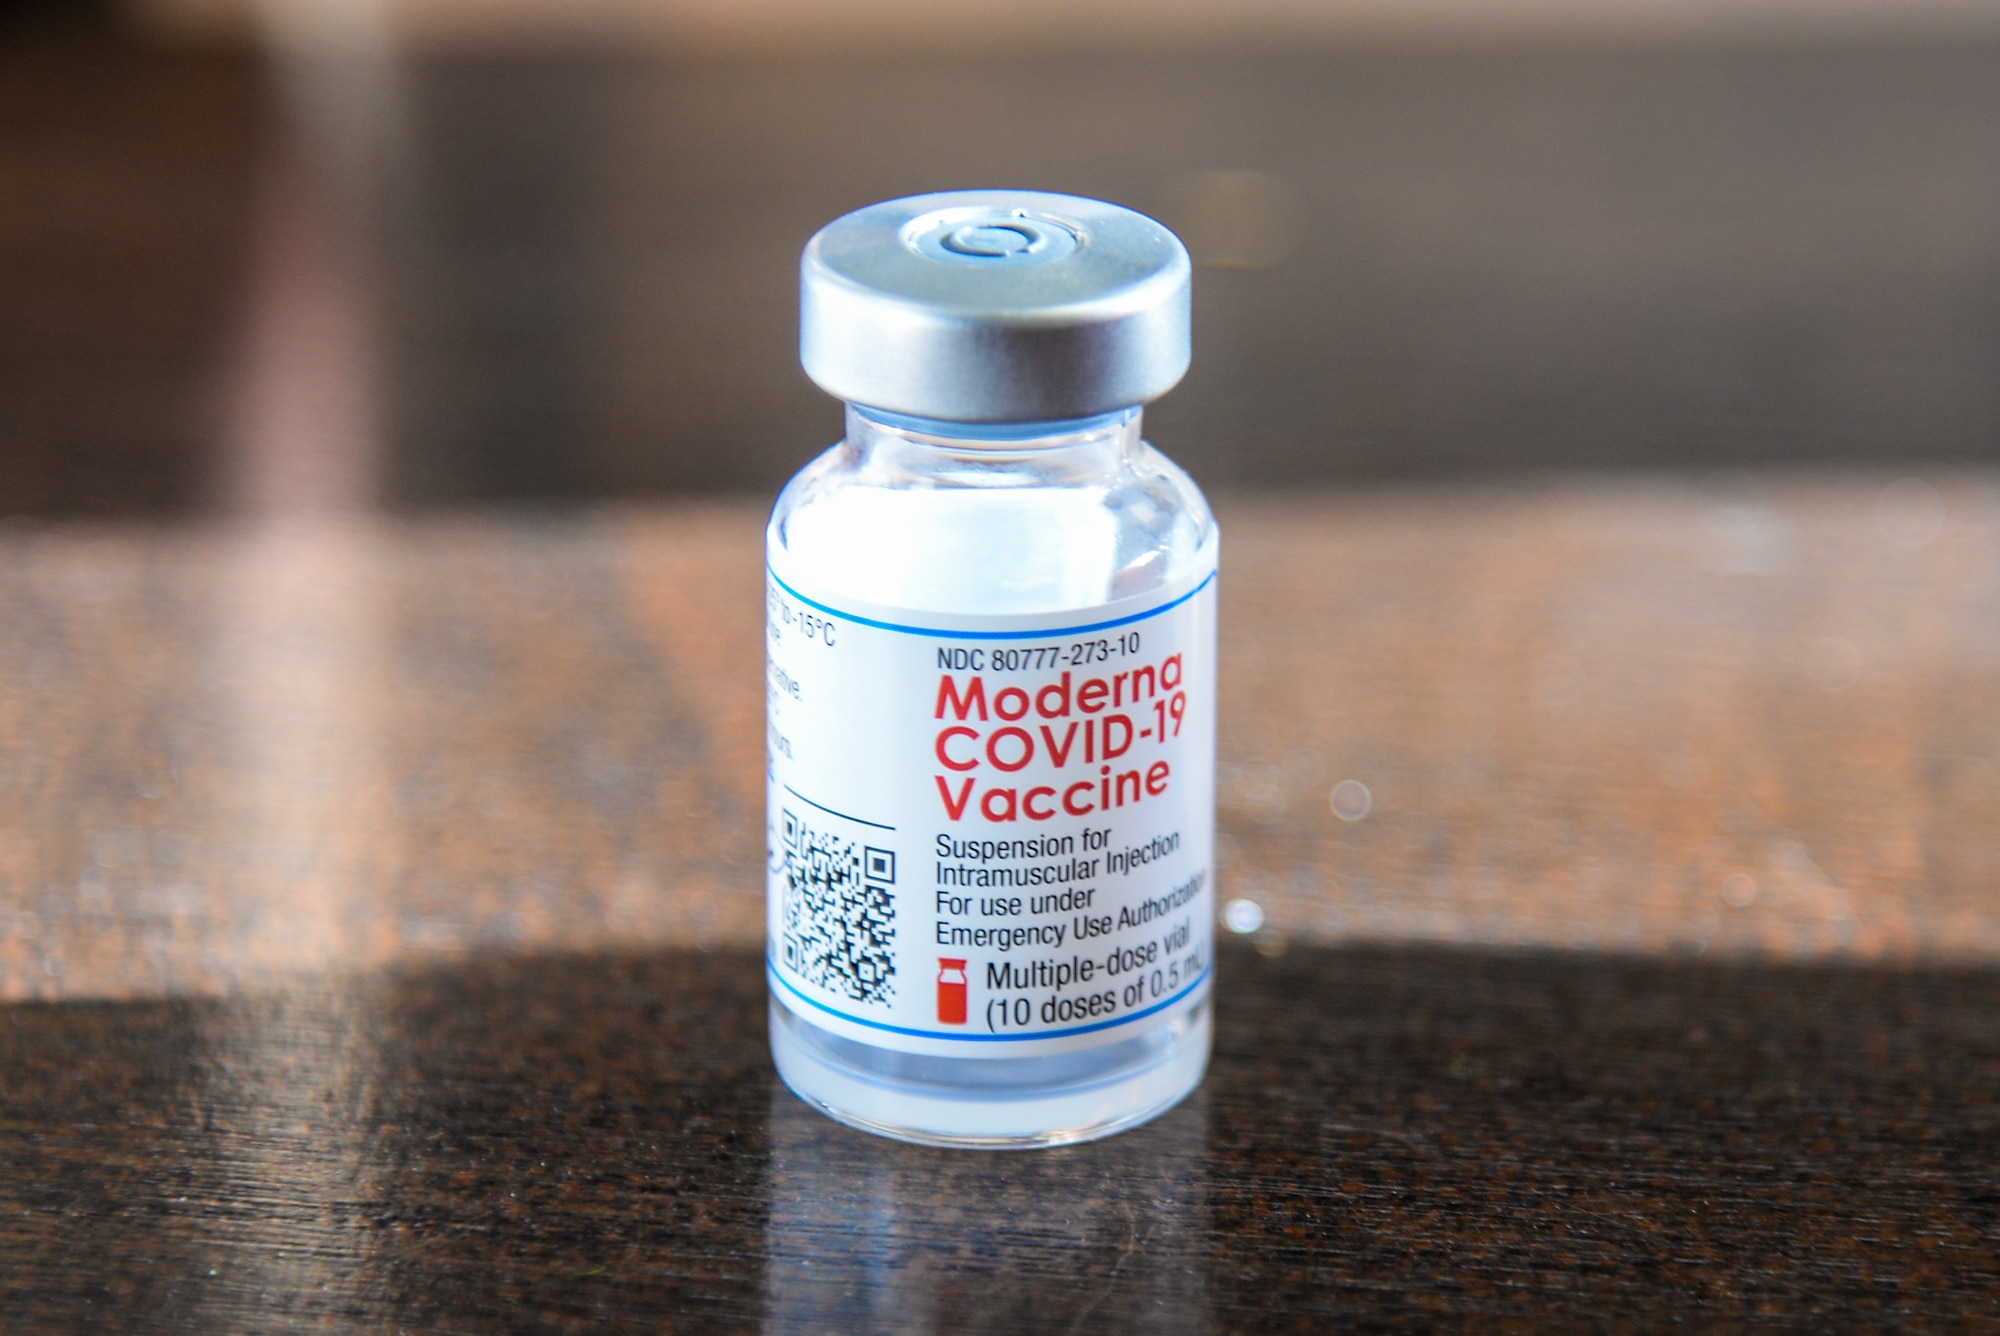 A photo of a vial of the Moderna COVID-19 vaccine sitting on a table